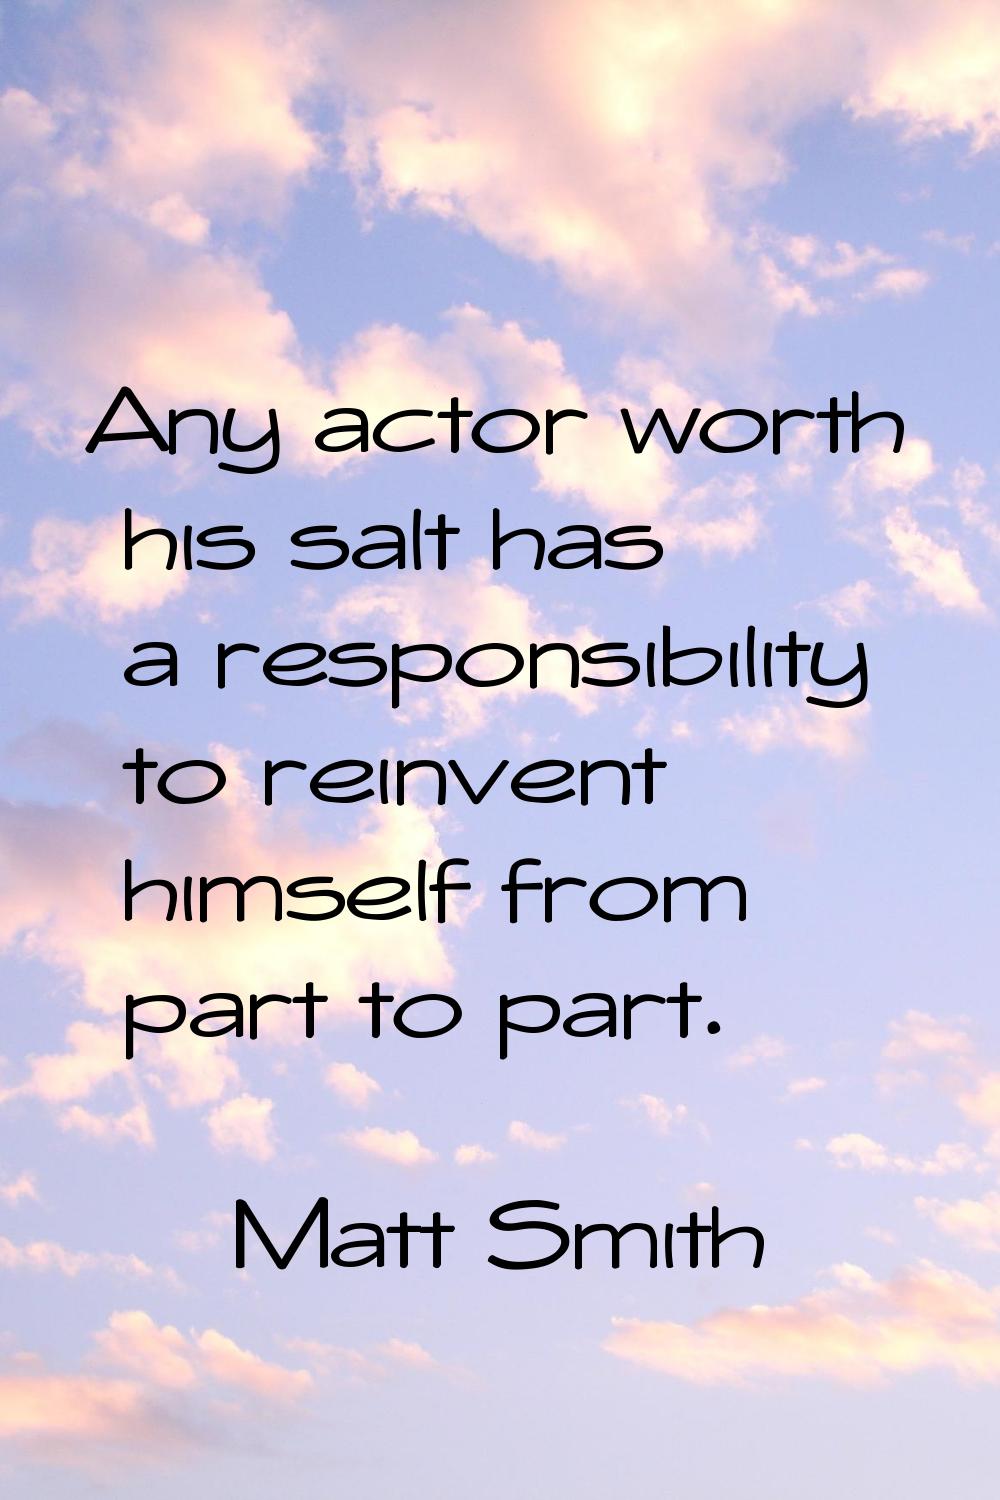 Any actor worth his salt has a responsibility to reinvent himself from part to part.